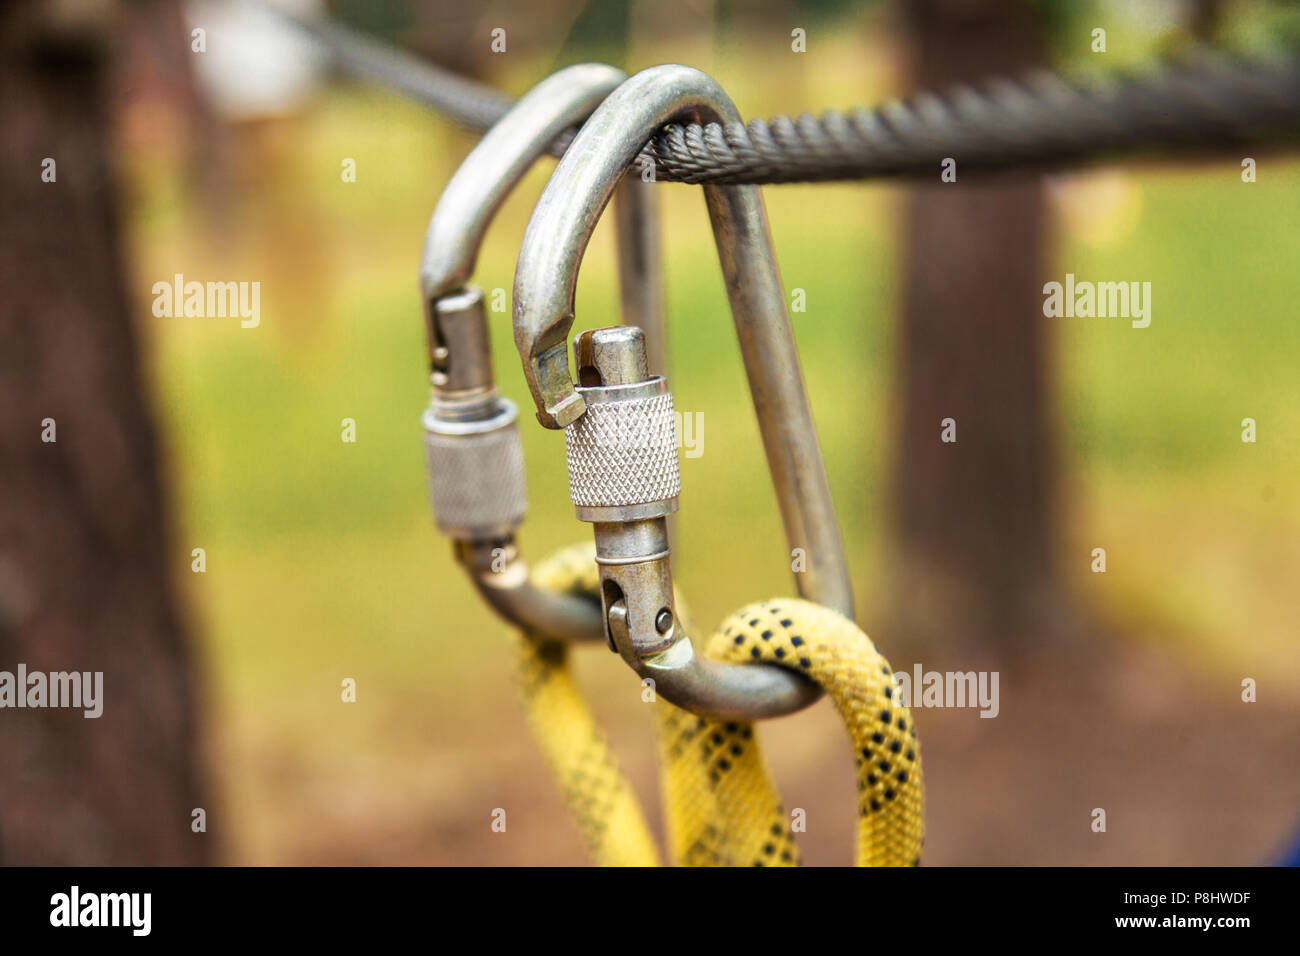 Carabiners weigh on safety rope Stock Photo